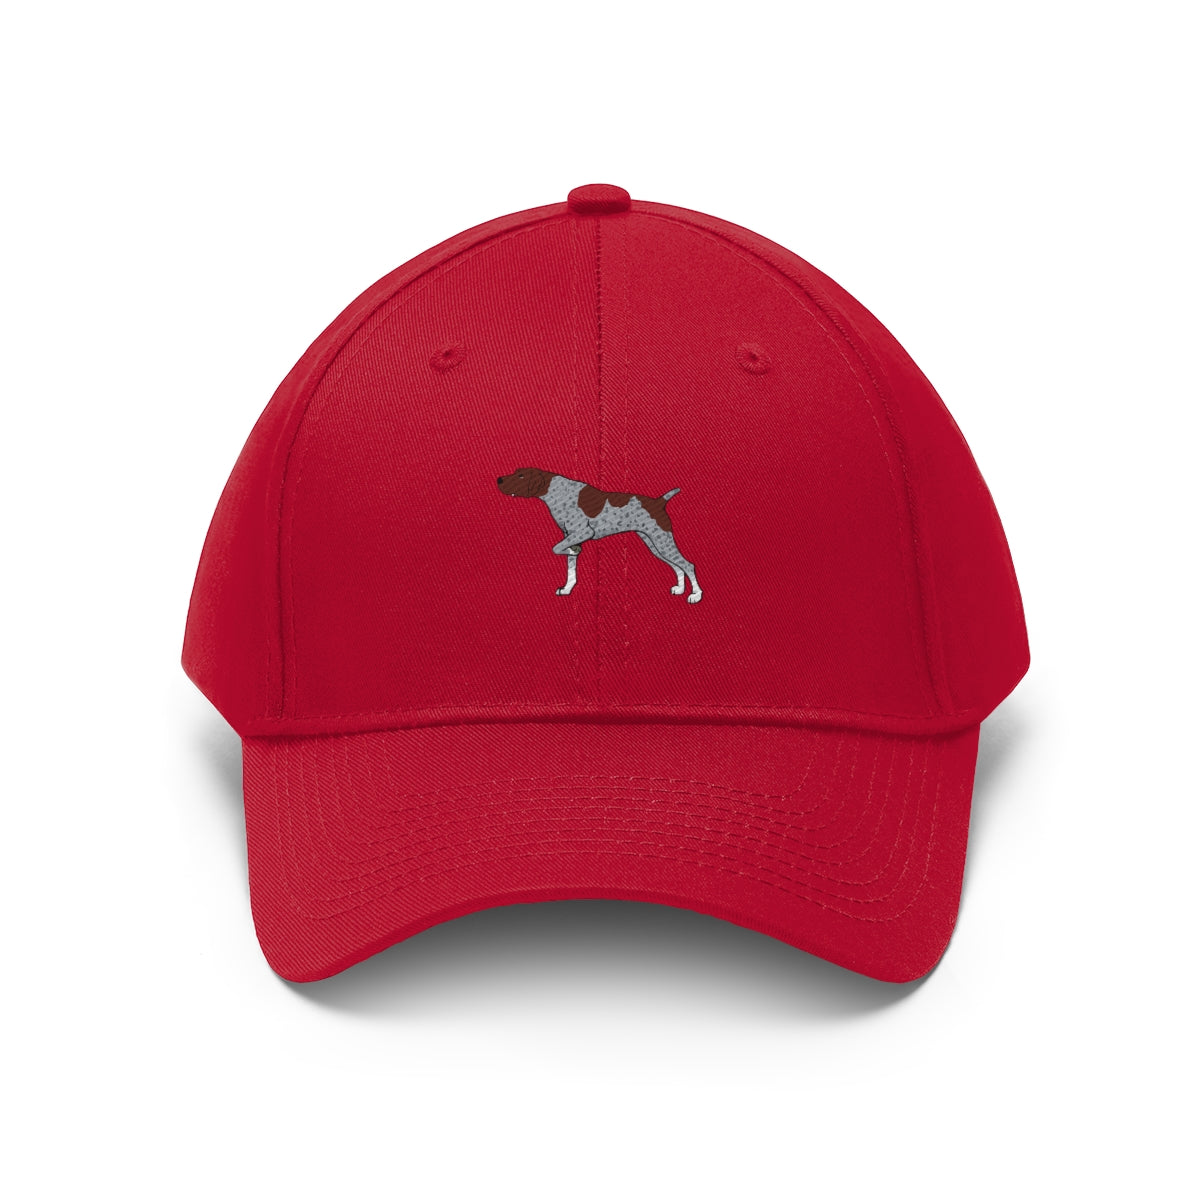 German Shorthaired Pointer Unisex Twill Hat, Cotton Twill, Adjustable Velcro Closure, FREE Shipping, Made in USA!!